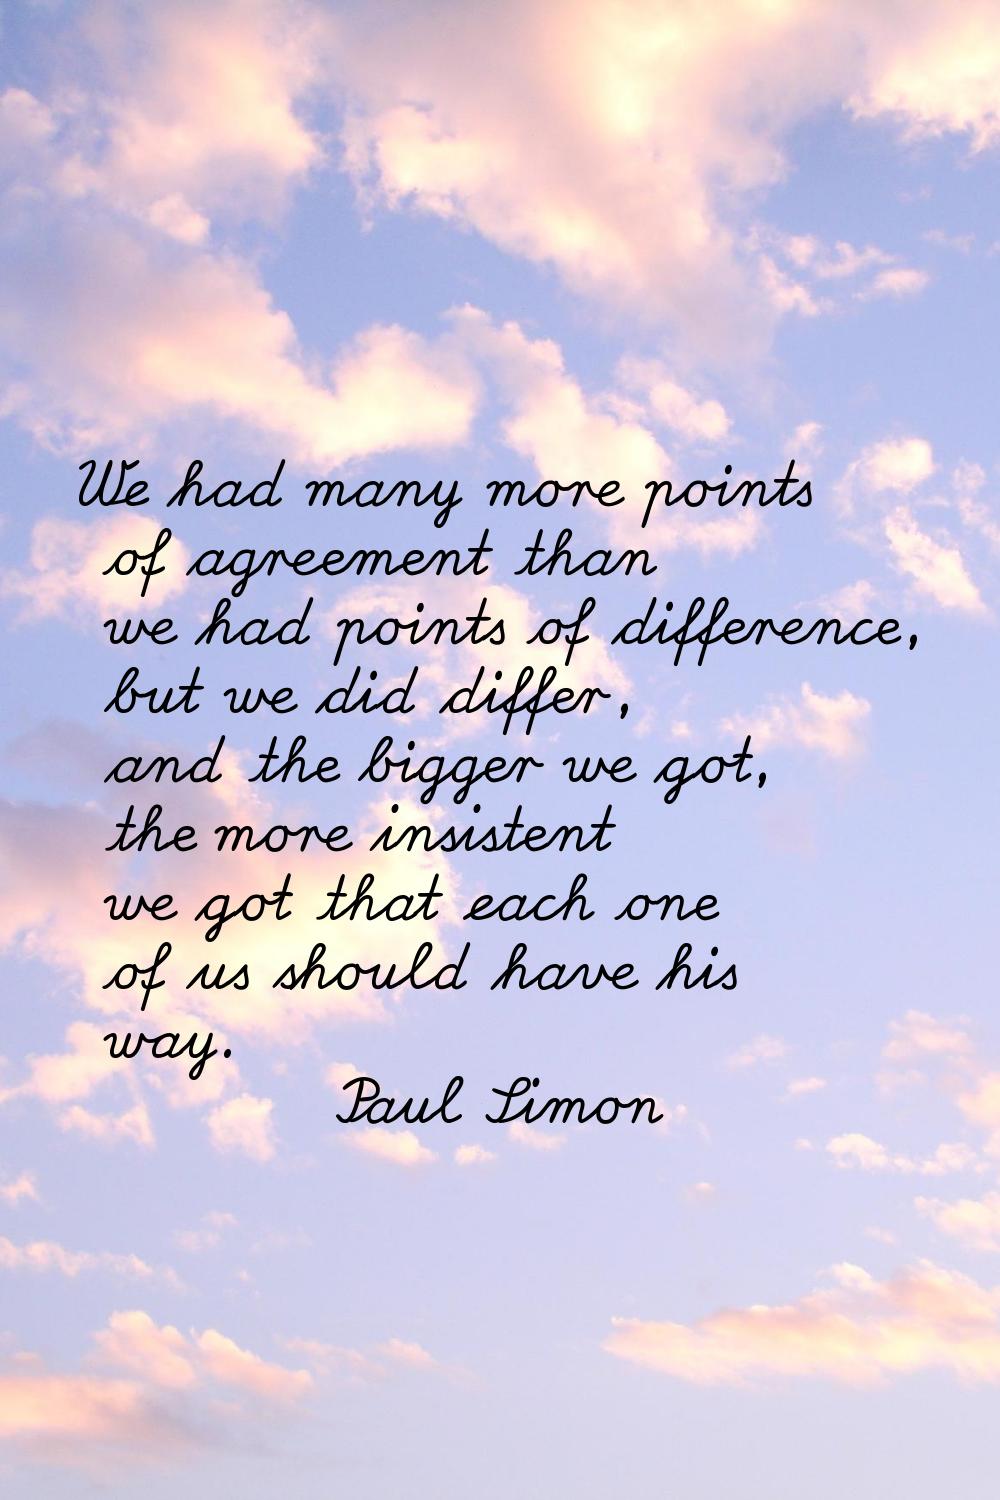 We had many more points of agreement than we had points of difference, but we did differ, and the b